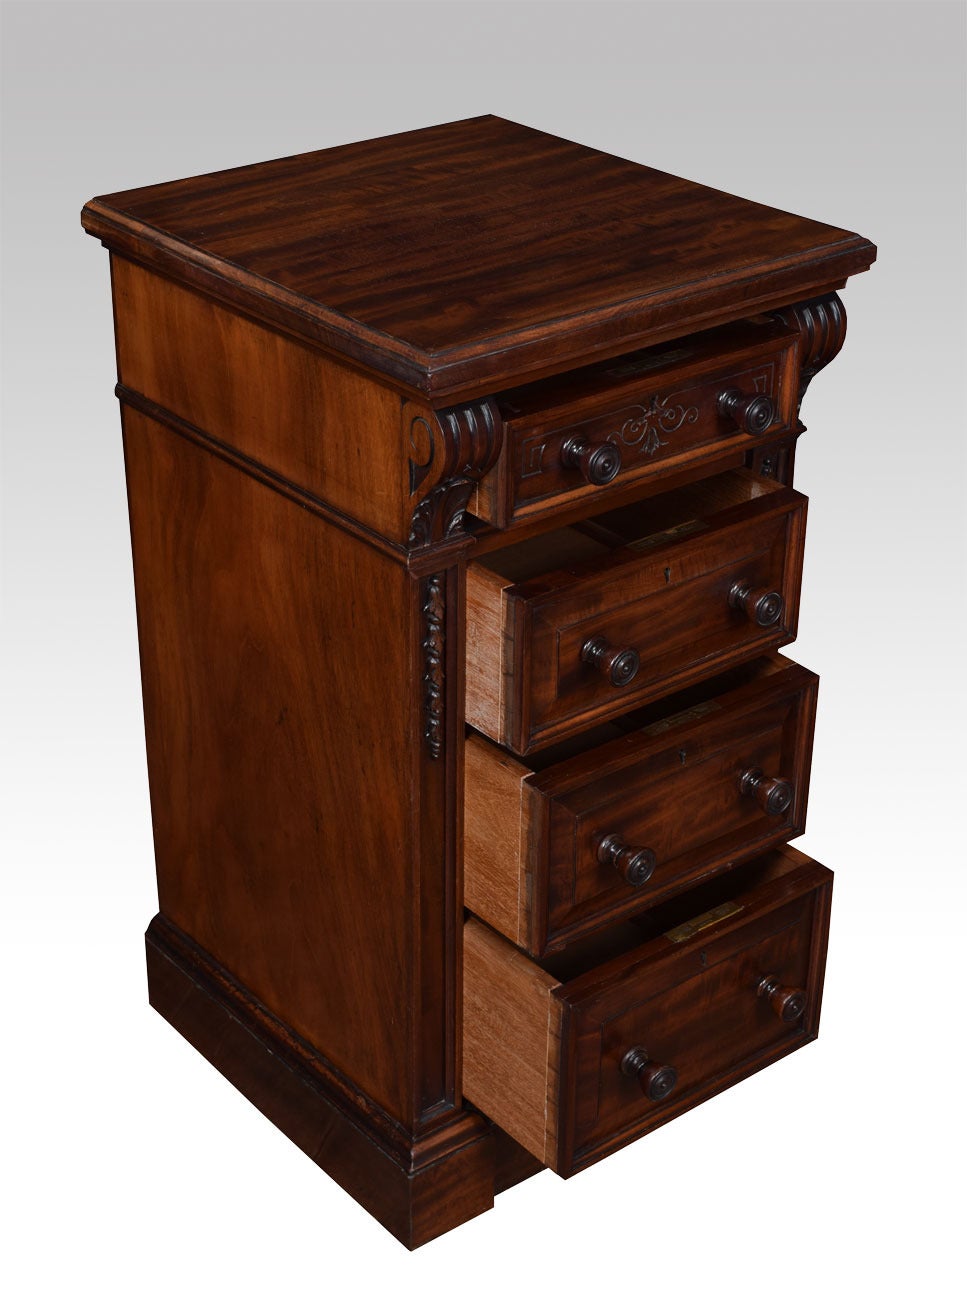 Pair of mahogany miniature wellington chests, the rectangular top above four graduated short drawers with turned wooden handles between corbelled uprights raised on a plinth base (adapted)
Dimensions
Height 31.5 Inches
Width 17 Inches
Depth 17.5